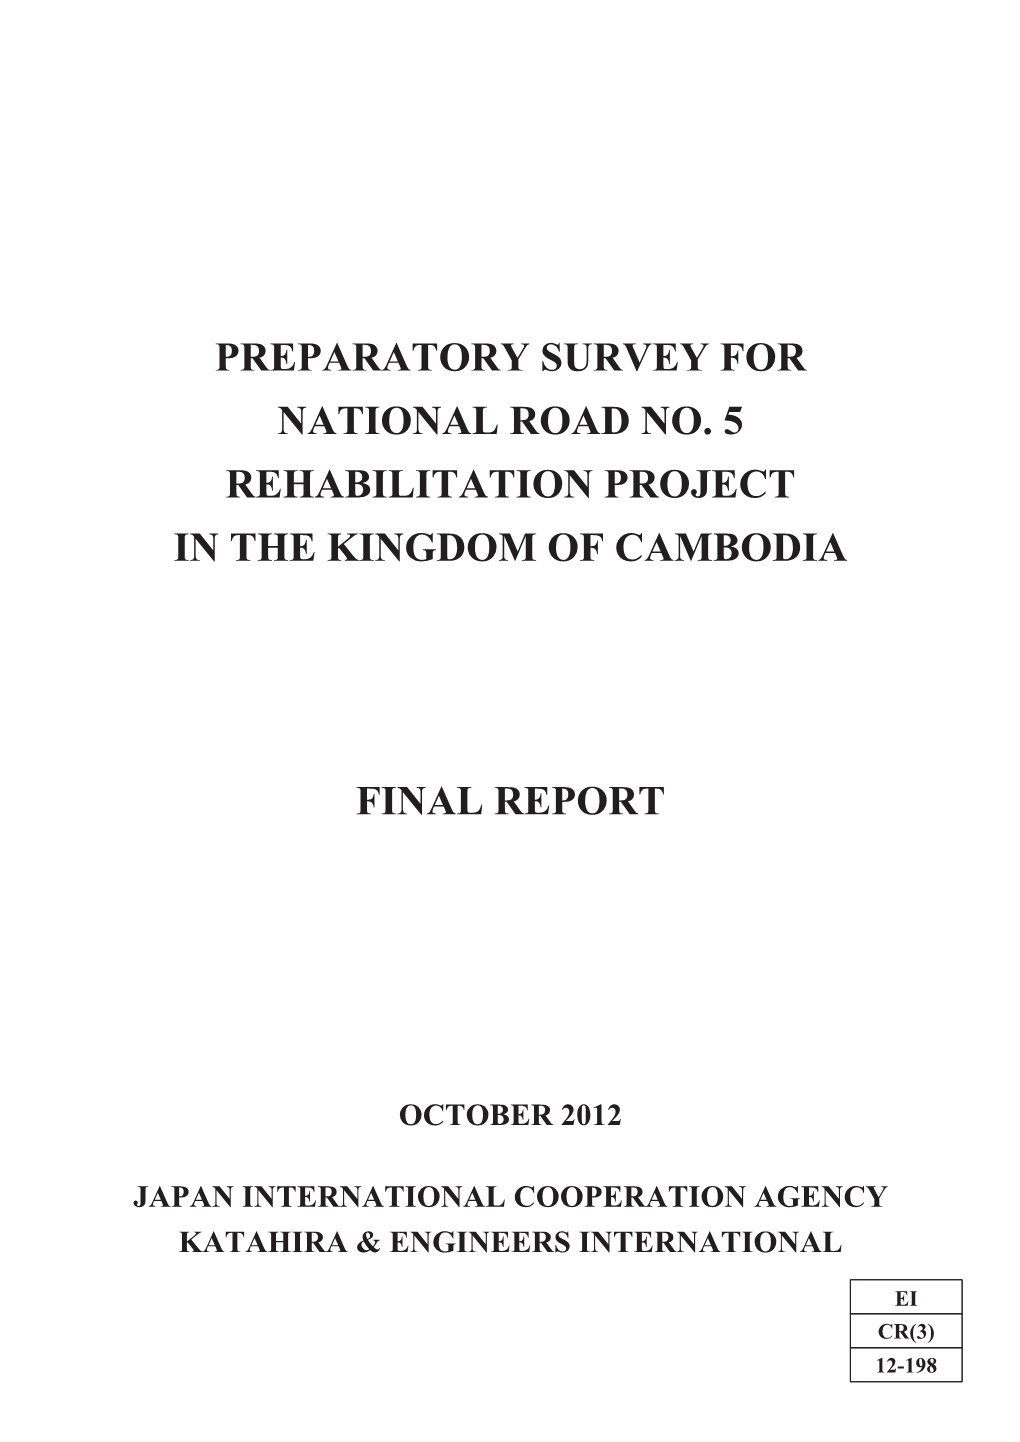 Preparatory Survey for National Road No. 5 Rehabilitation Project in the Kingdom of Cambodia